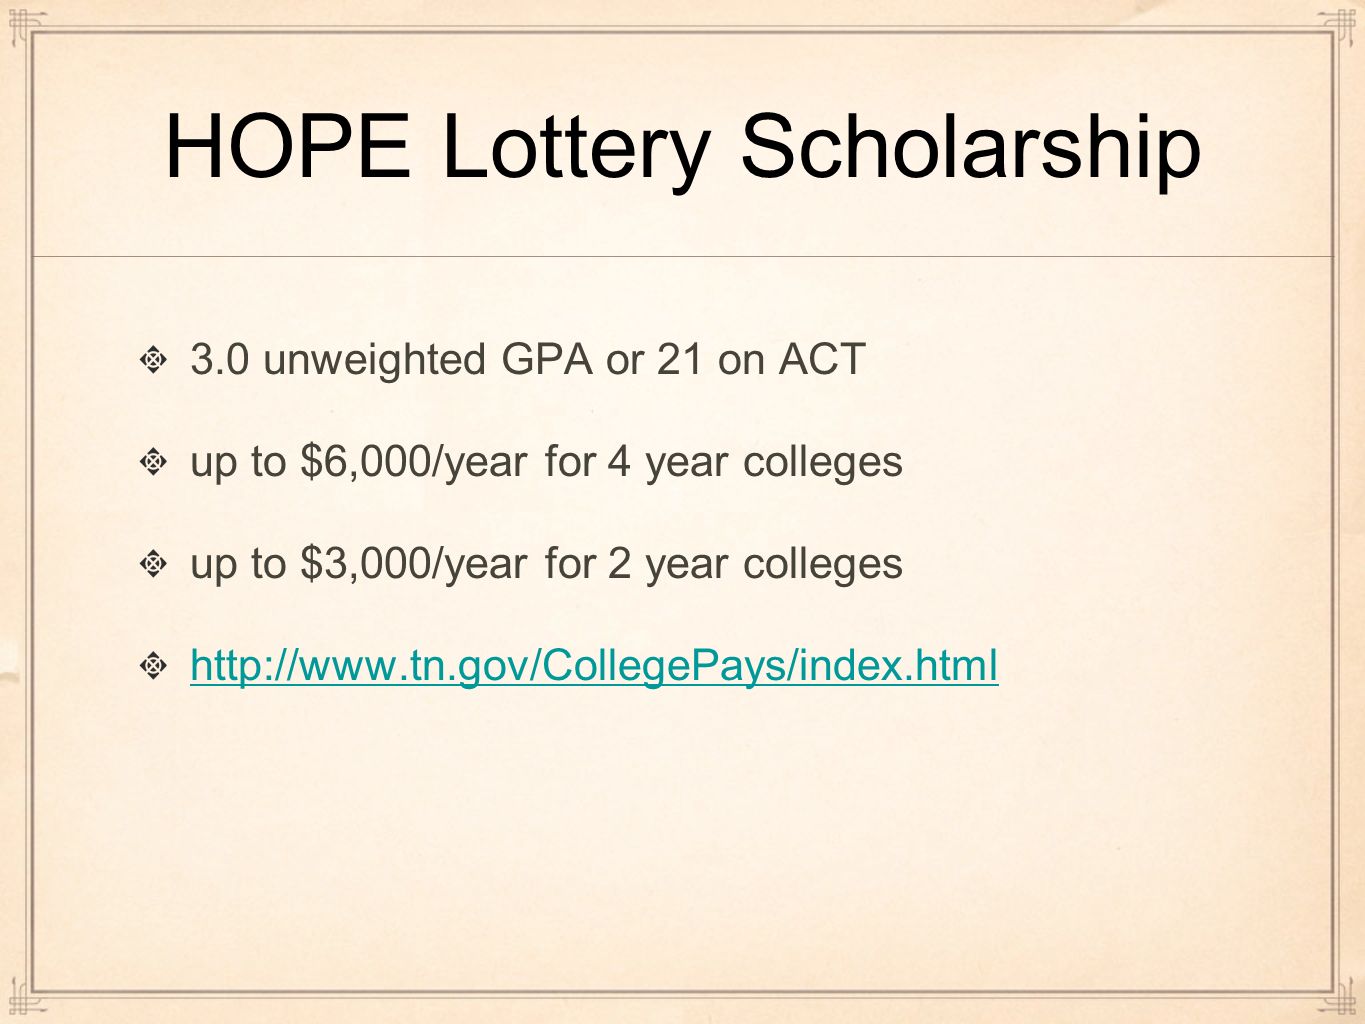 3.0 unweighted GPA or 21 on ACT up to $6,000/year for 4 year colleges up to $3,000/year for 2 year colleges   HOPE Lottery Scholarship